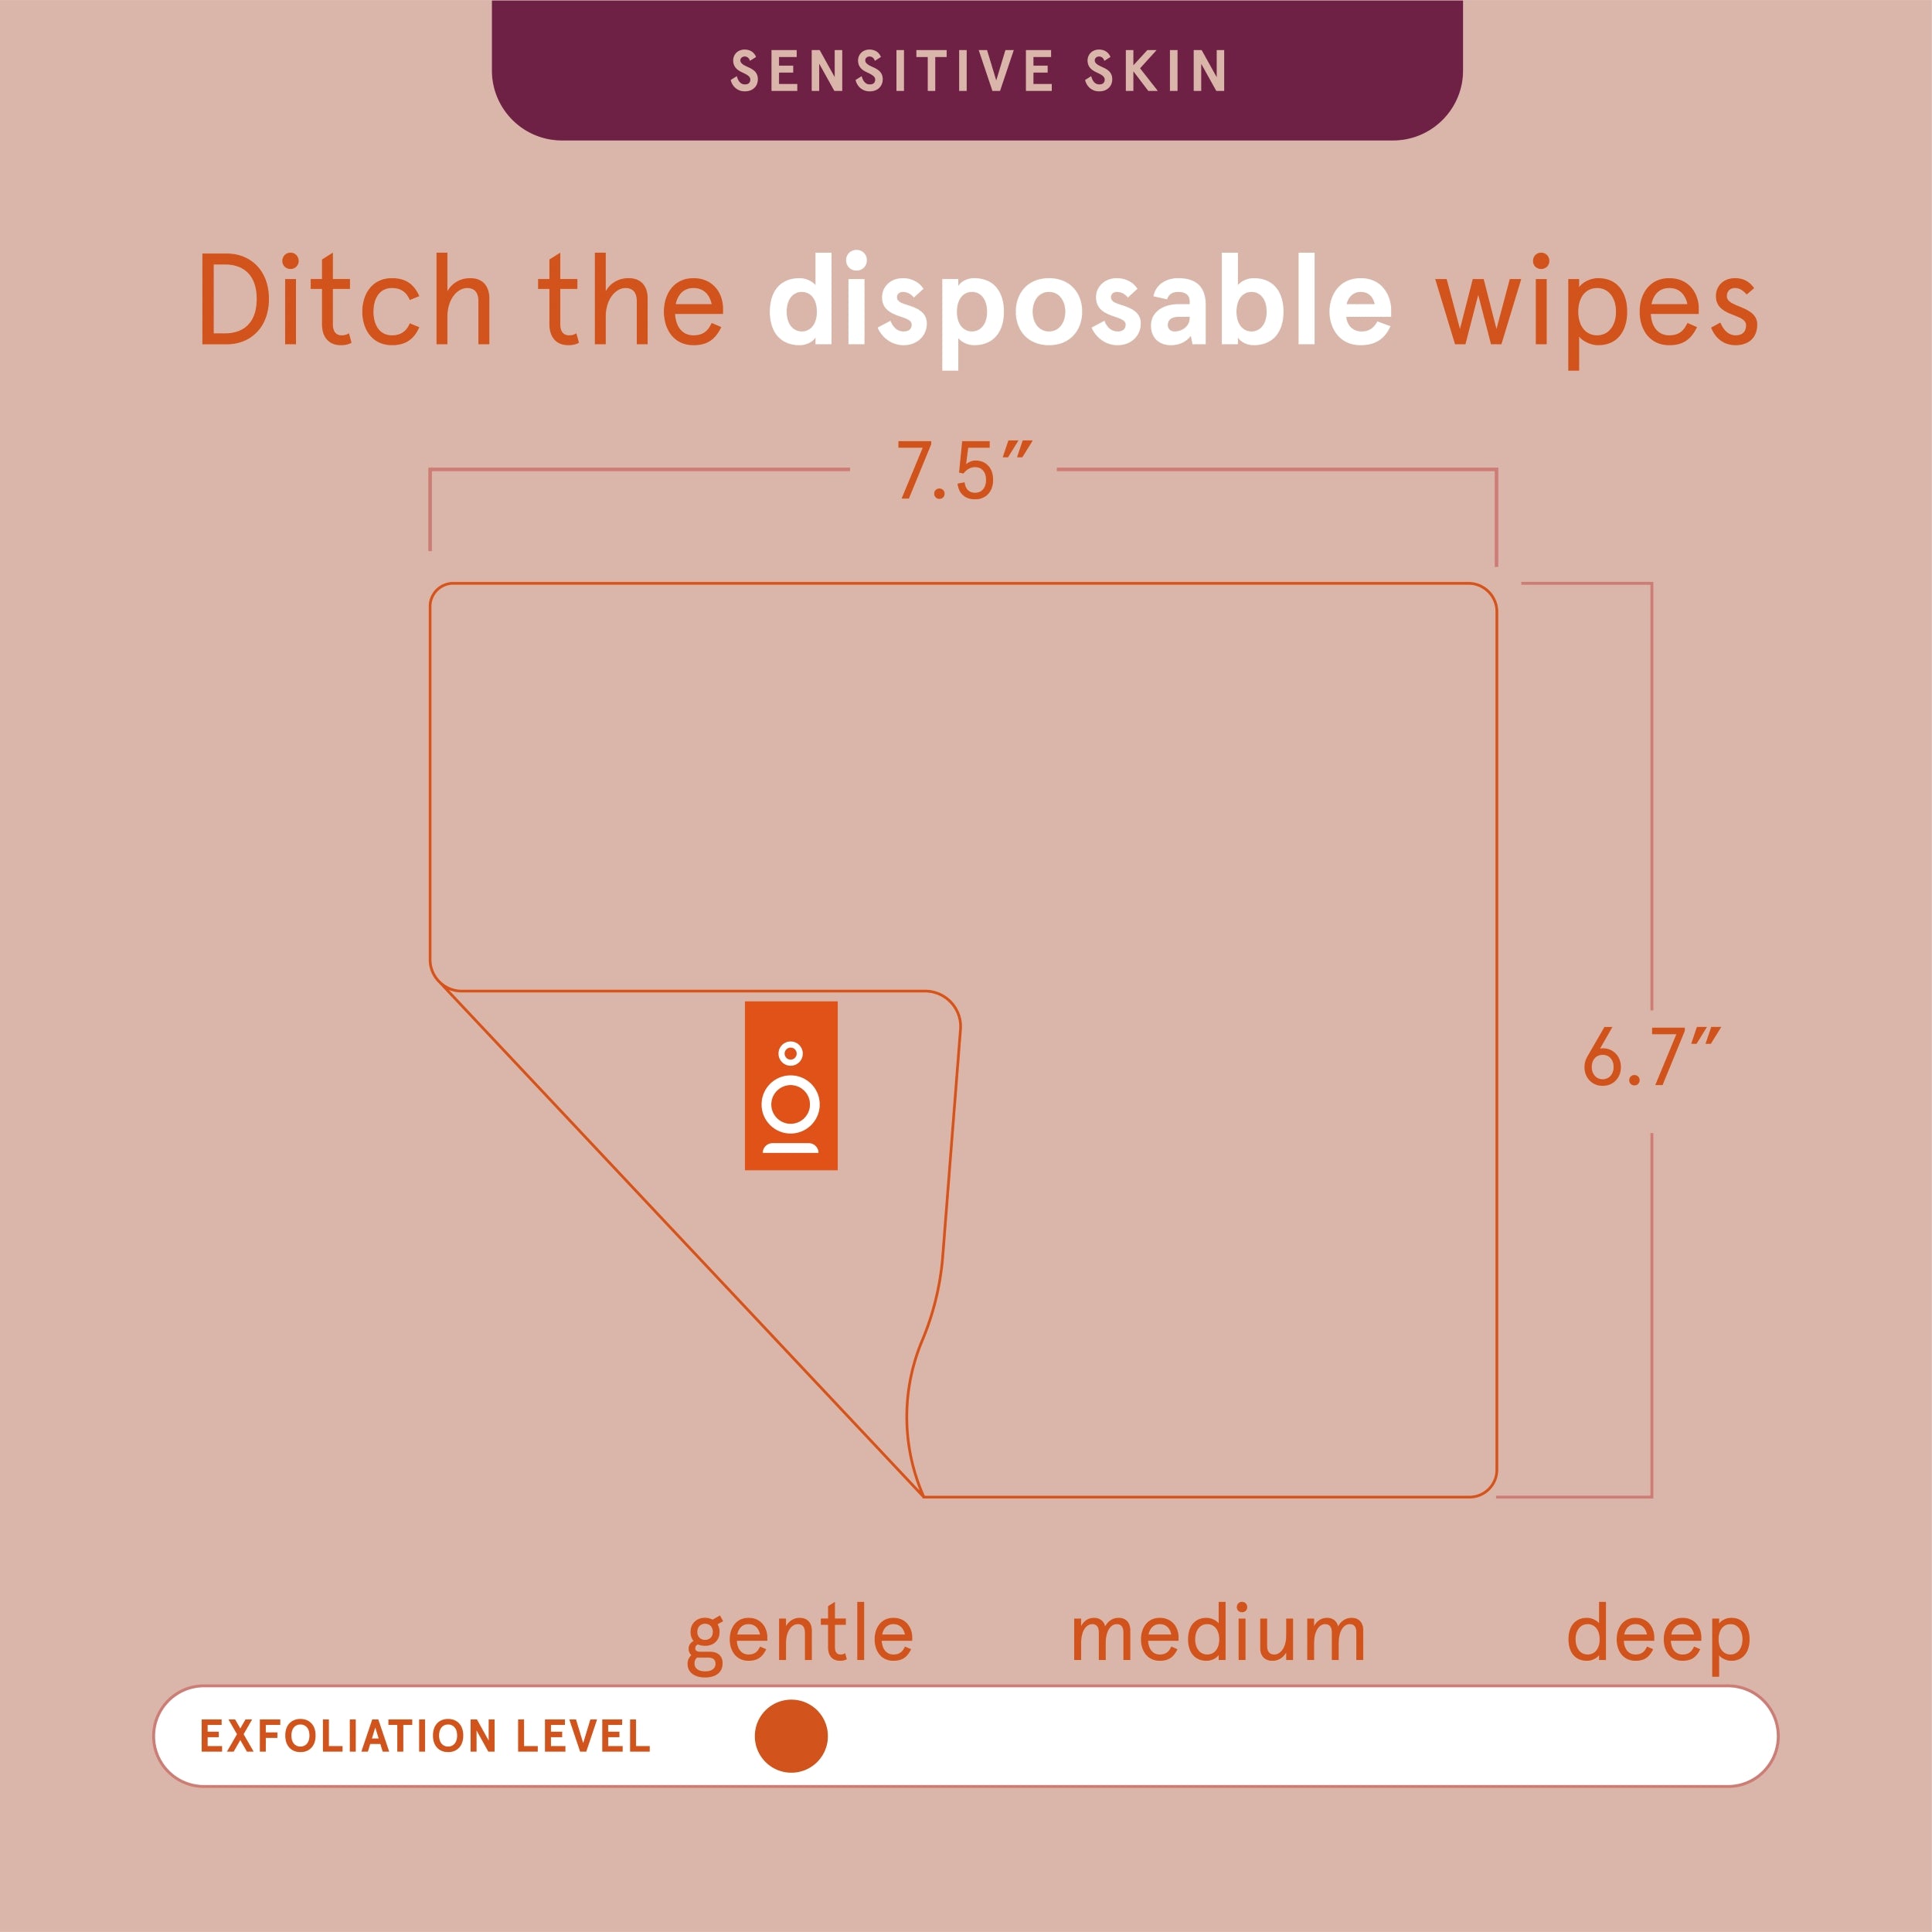 Bath and Body Sensitive Skin Dual-Texture Face Cloths, Assorted Colors, 3 Count